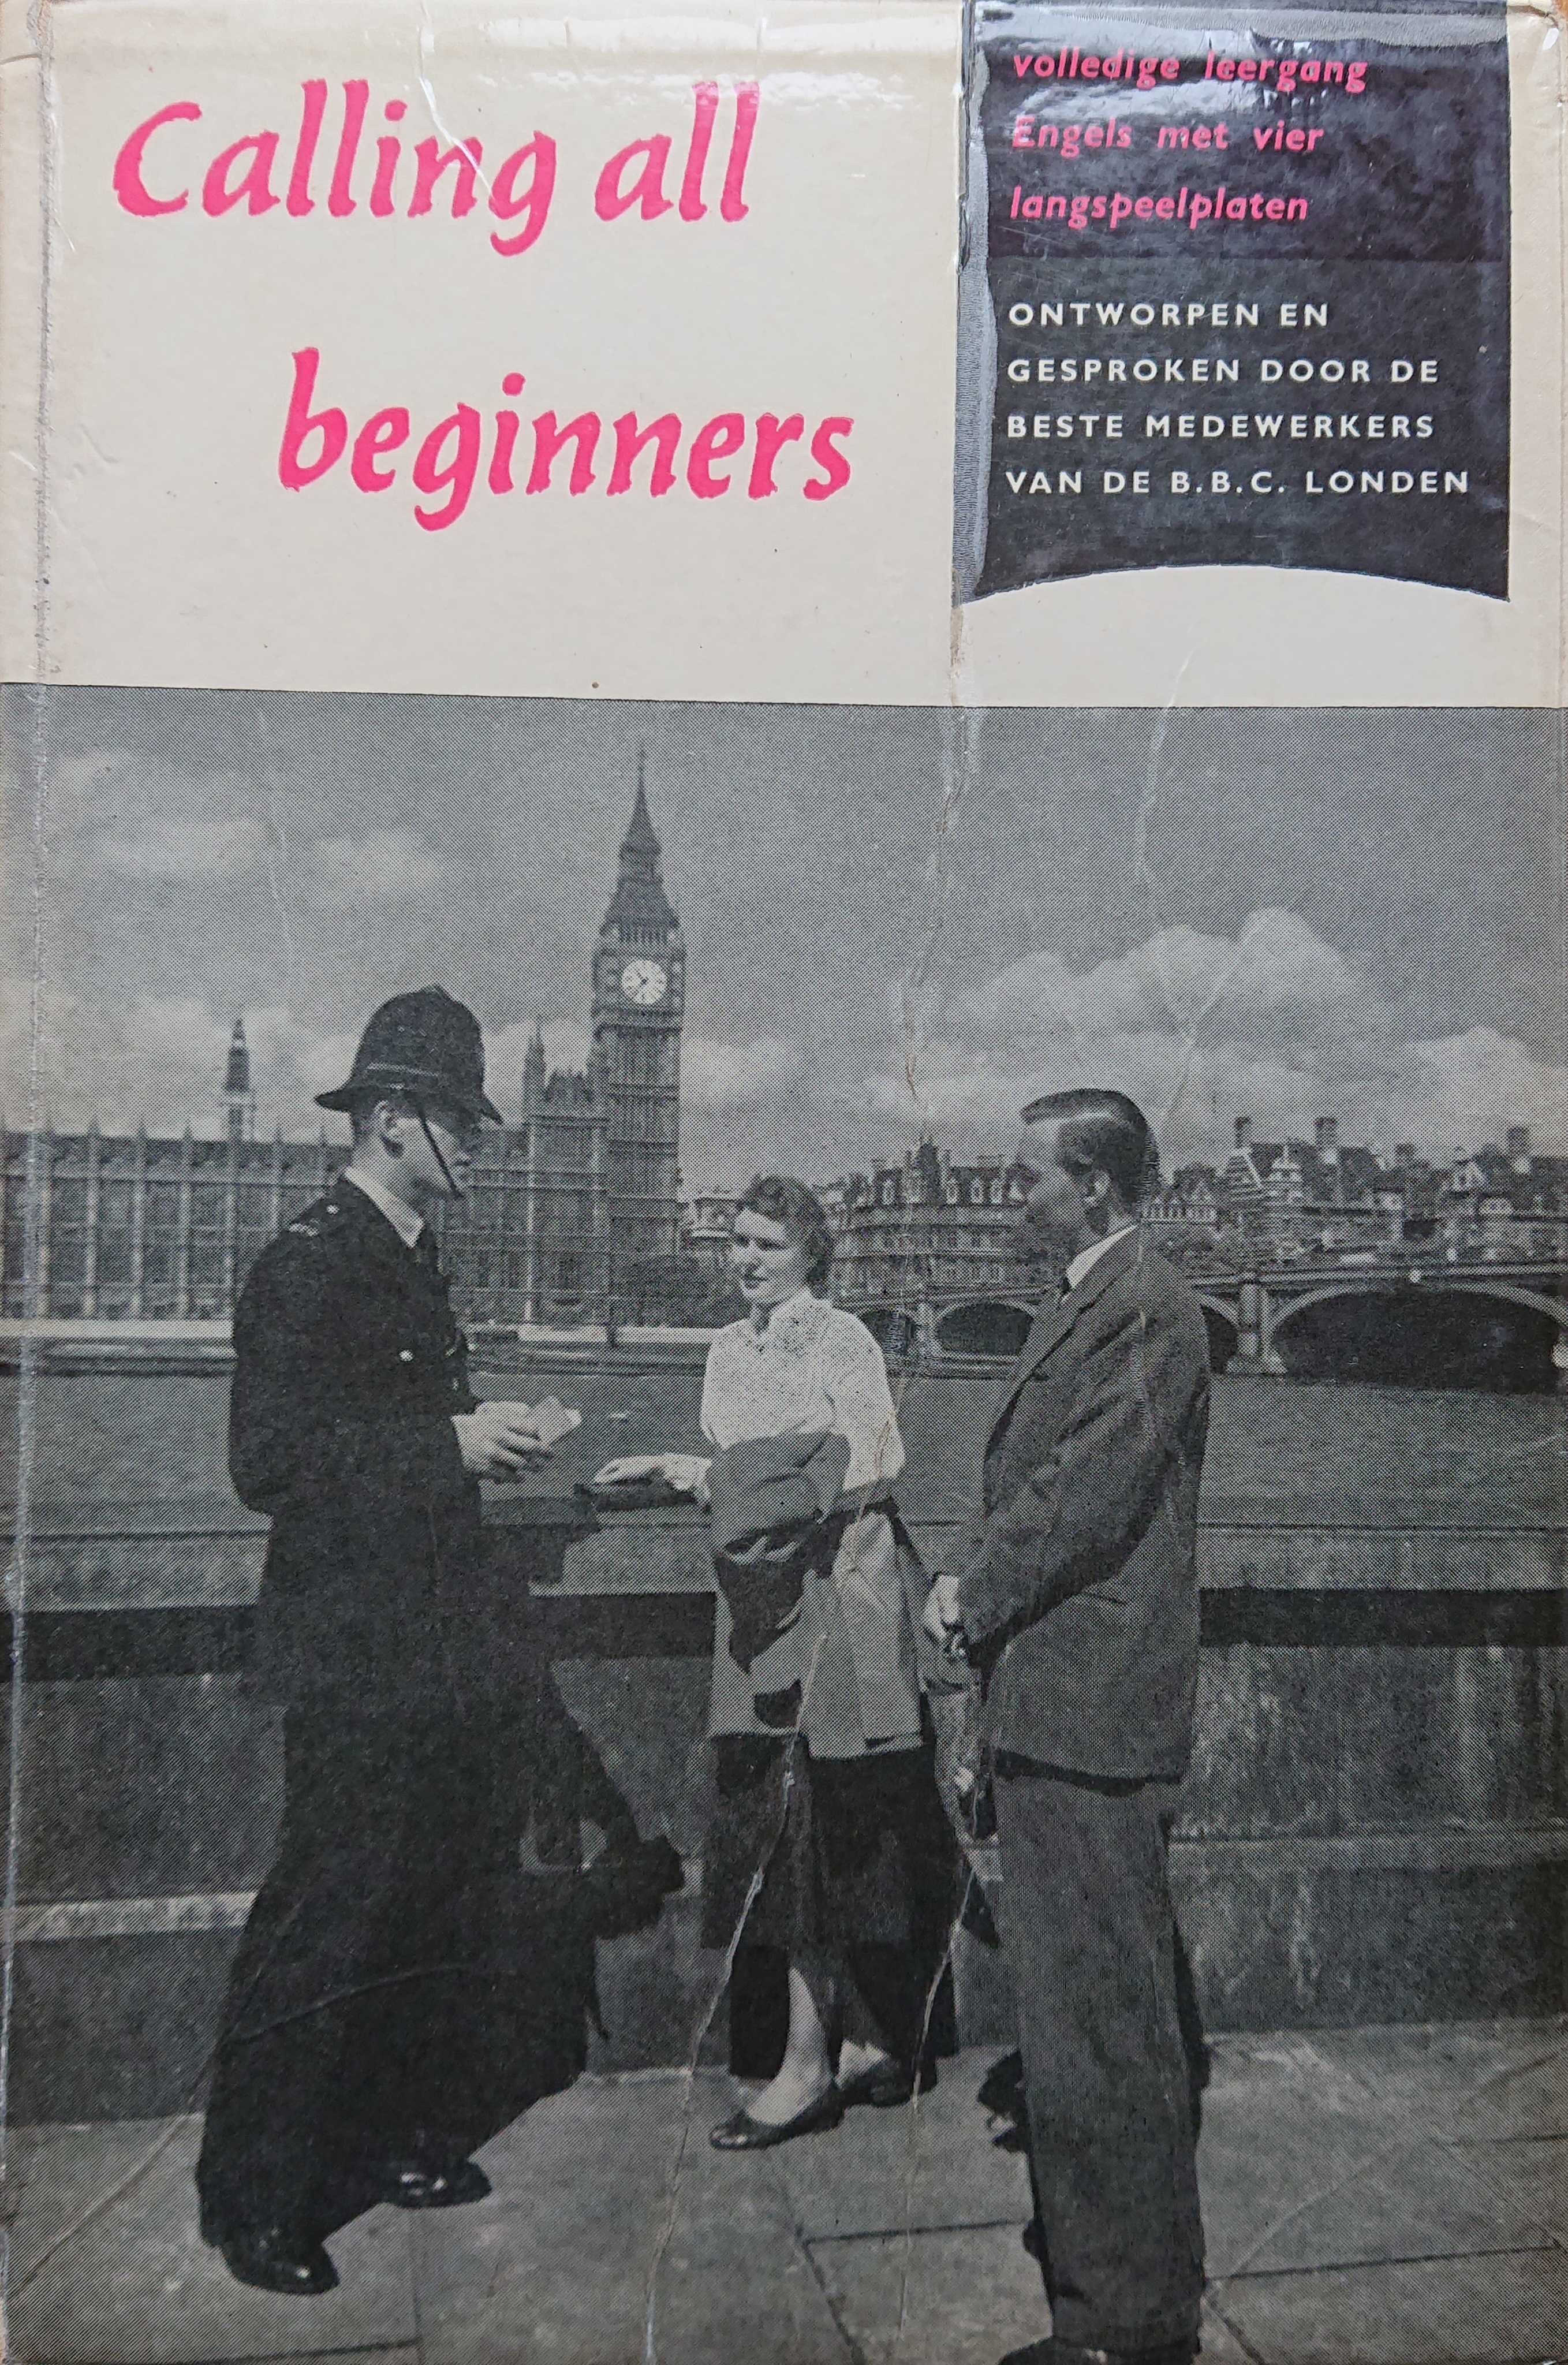 Picture of Calling all beginners - Dutch import by artist D. Hicks from the BBC books - Records and Tapes library